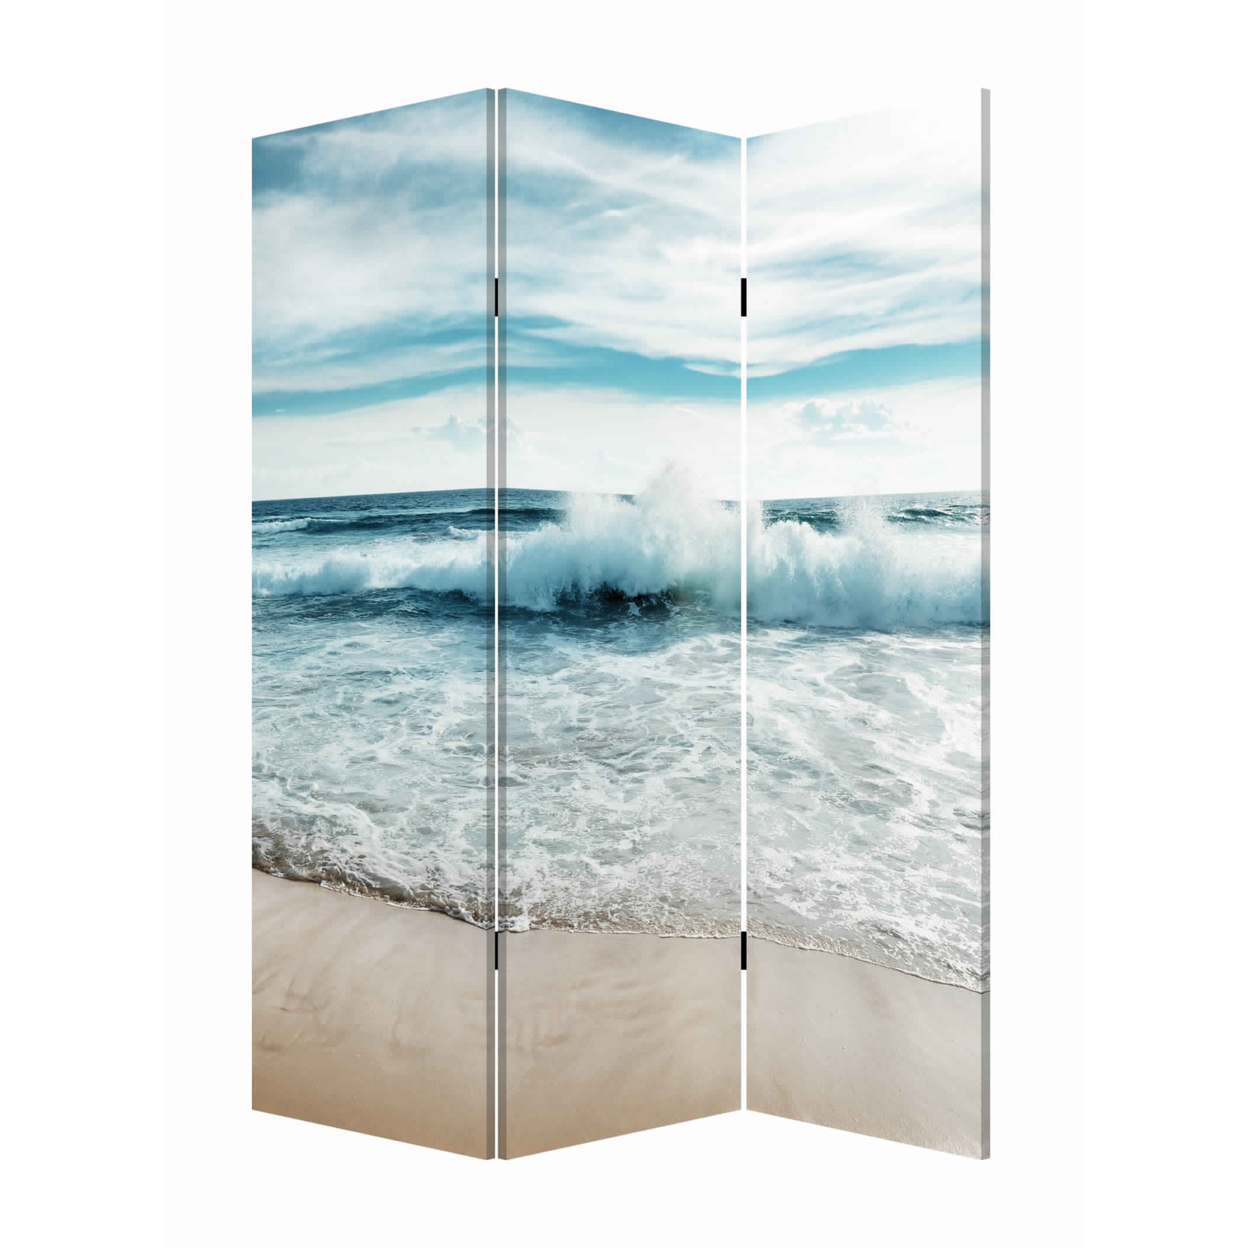 Foldable Canvas Screen With Ocean Shore Print And 3 Panels, Multicolor- Saltoro Sherpi